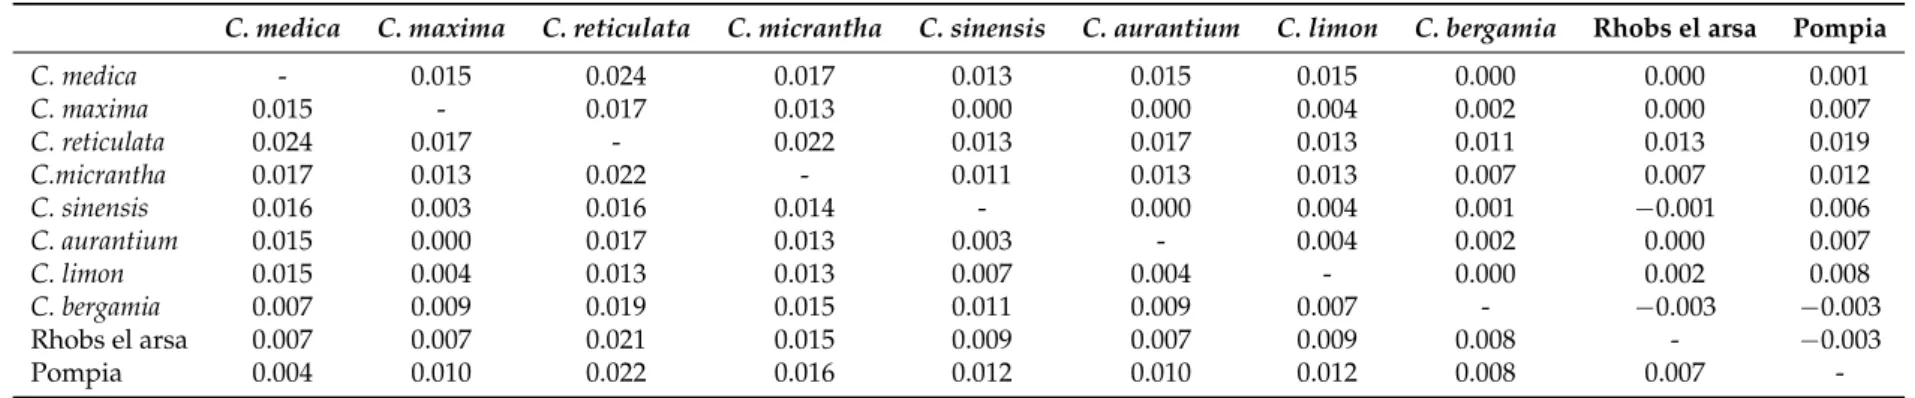 Table 3. Average genetic distance between taxa (below diagonal) and average net distance between taxa (above diagonal) based on ITS sequences